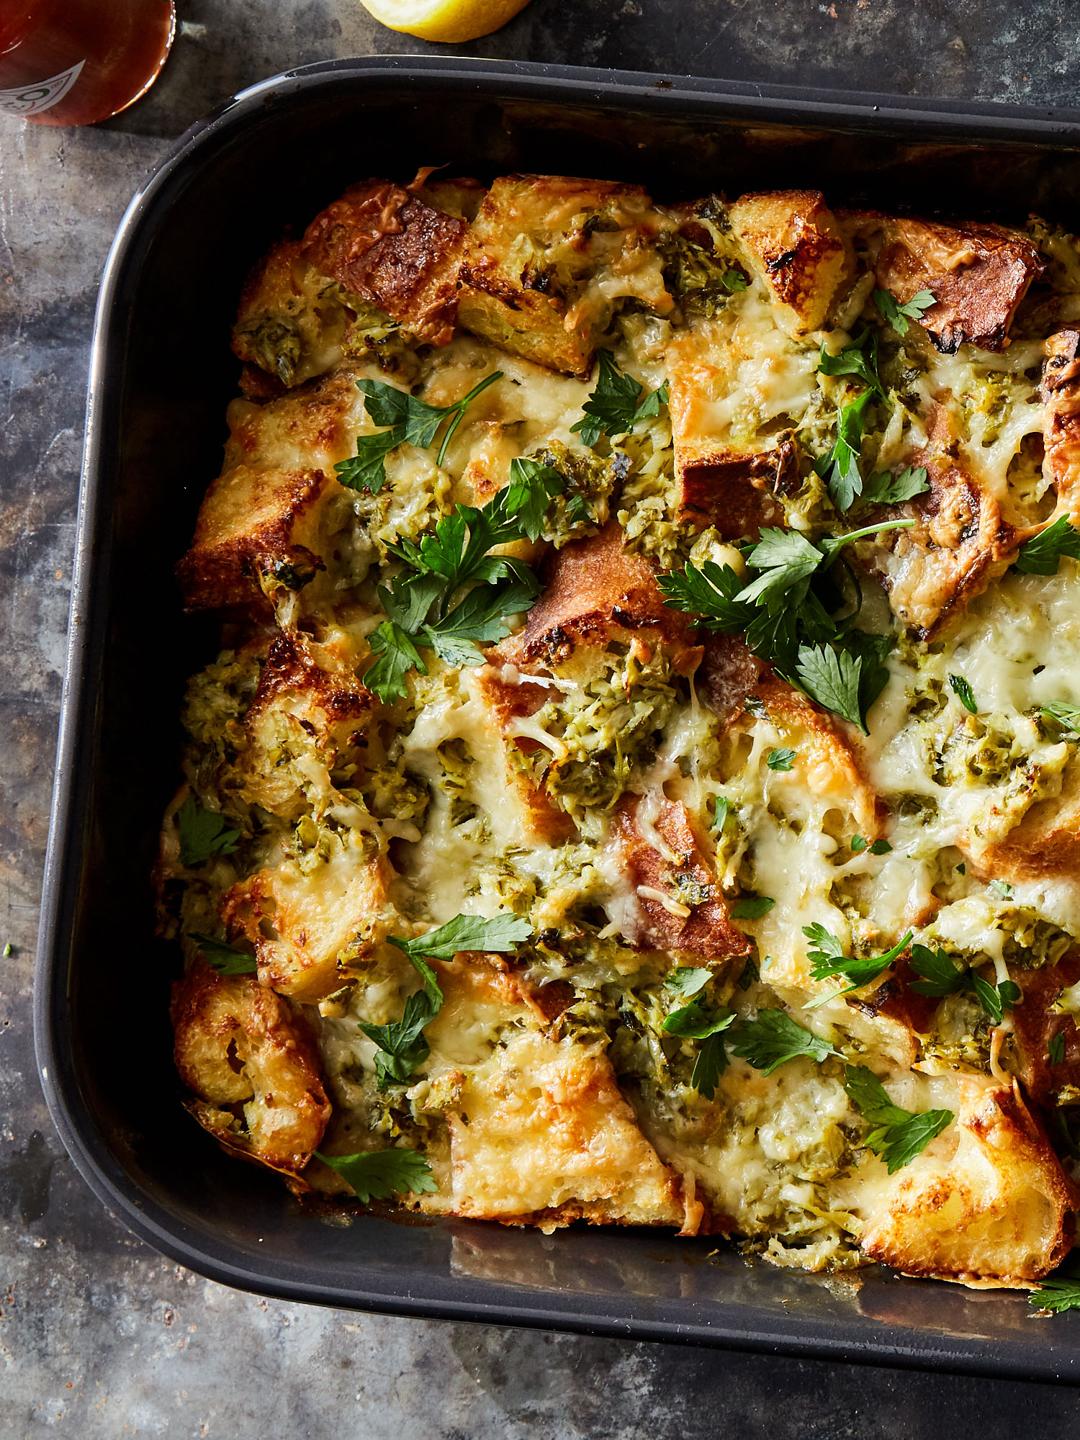 Savory Bread Pudding with Artichokes, Cheddar and Scallions